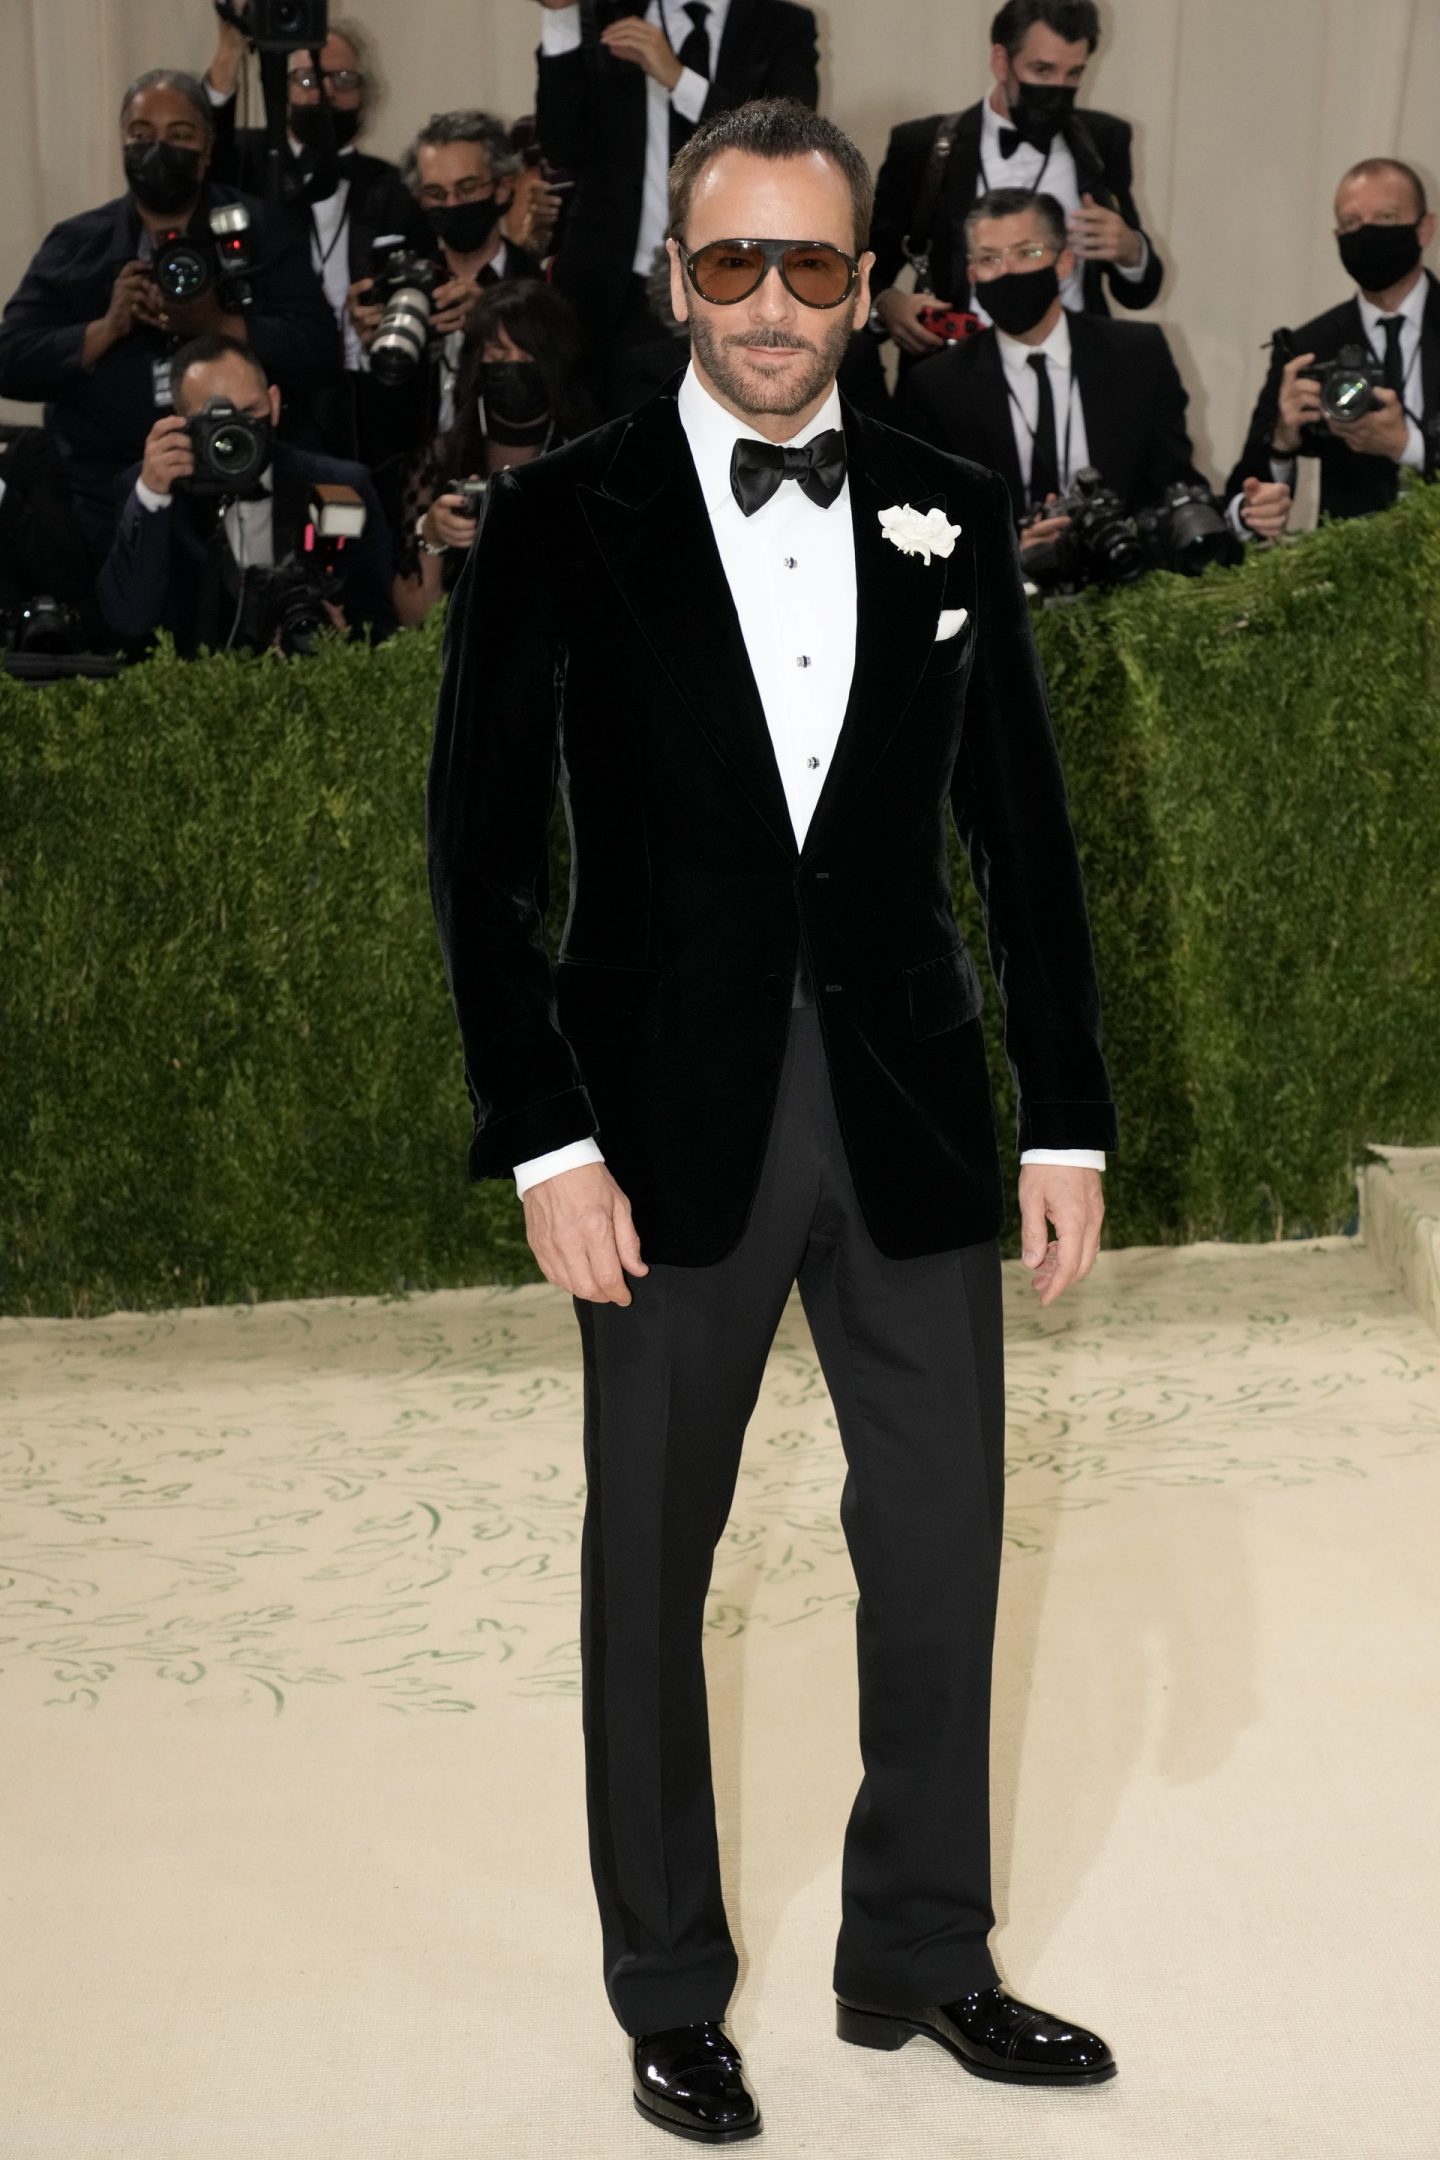 Tom Ford in Tom Ford Met gala 2021 outfits